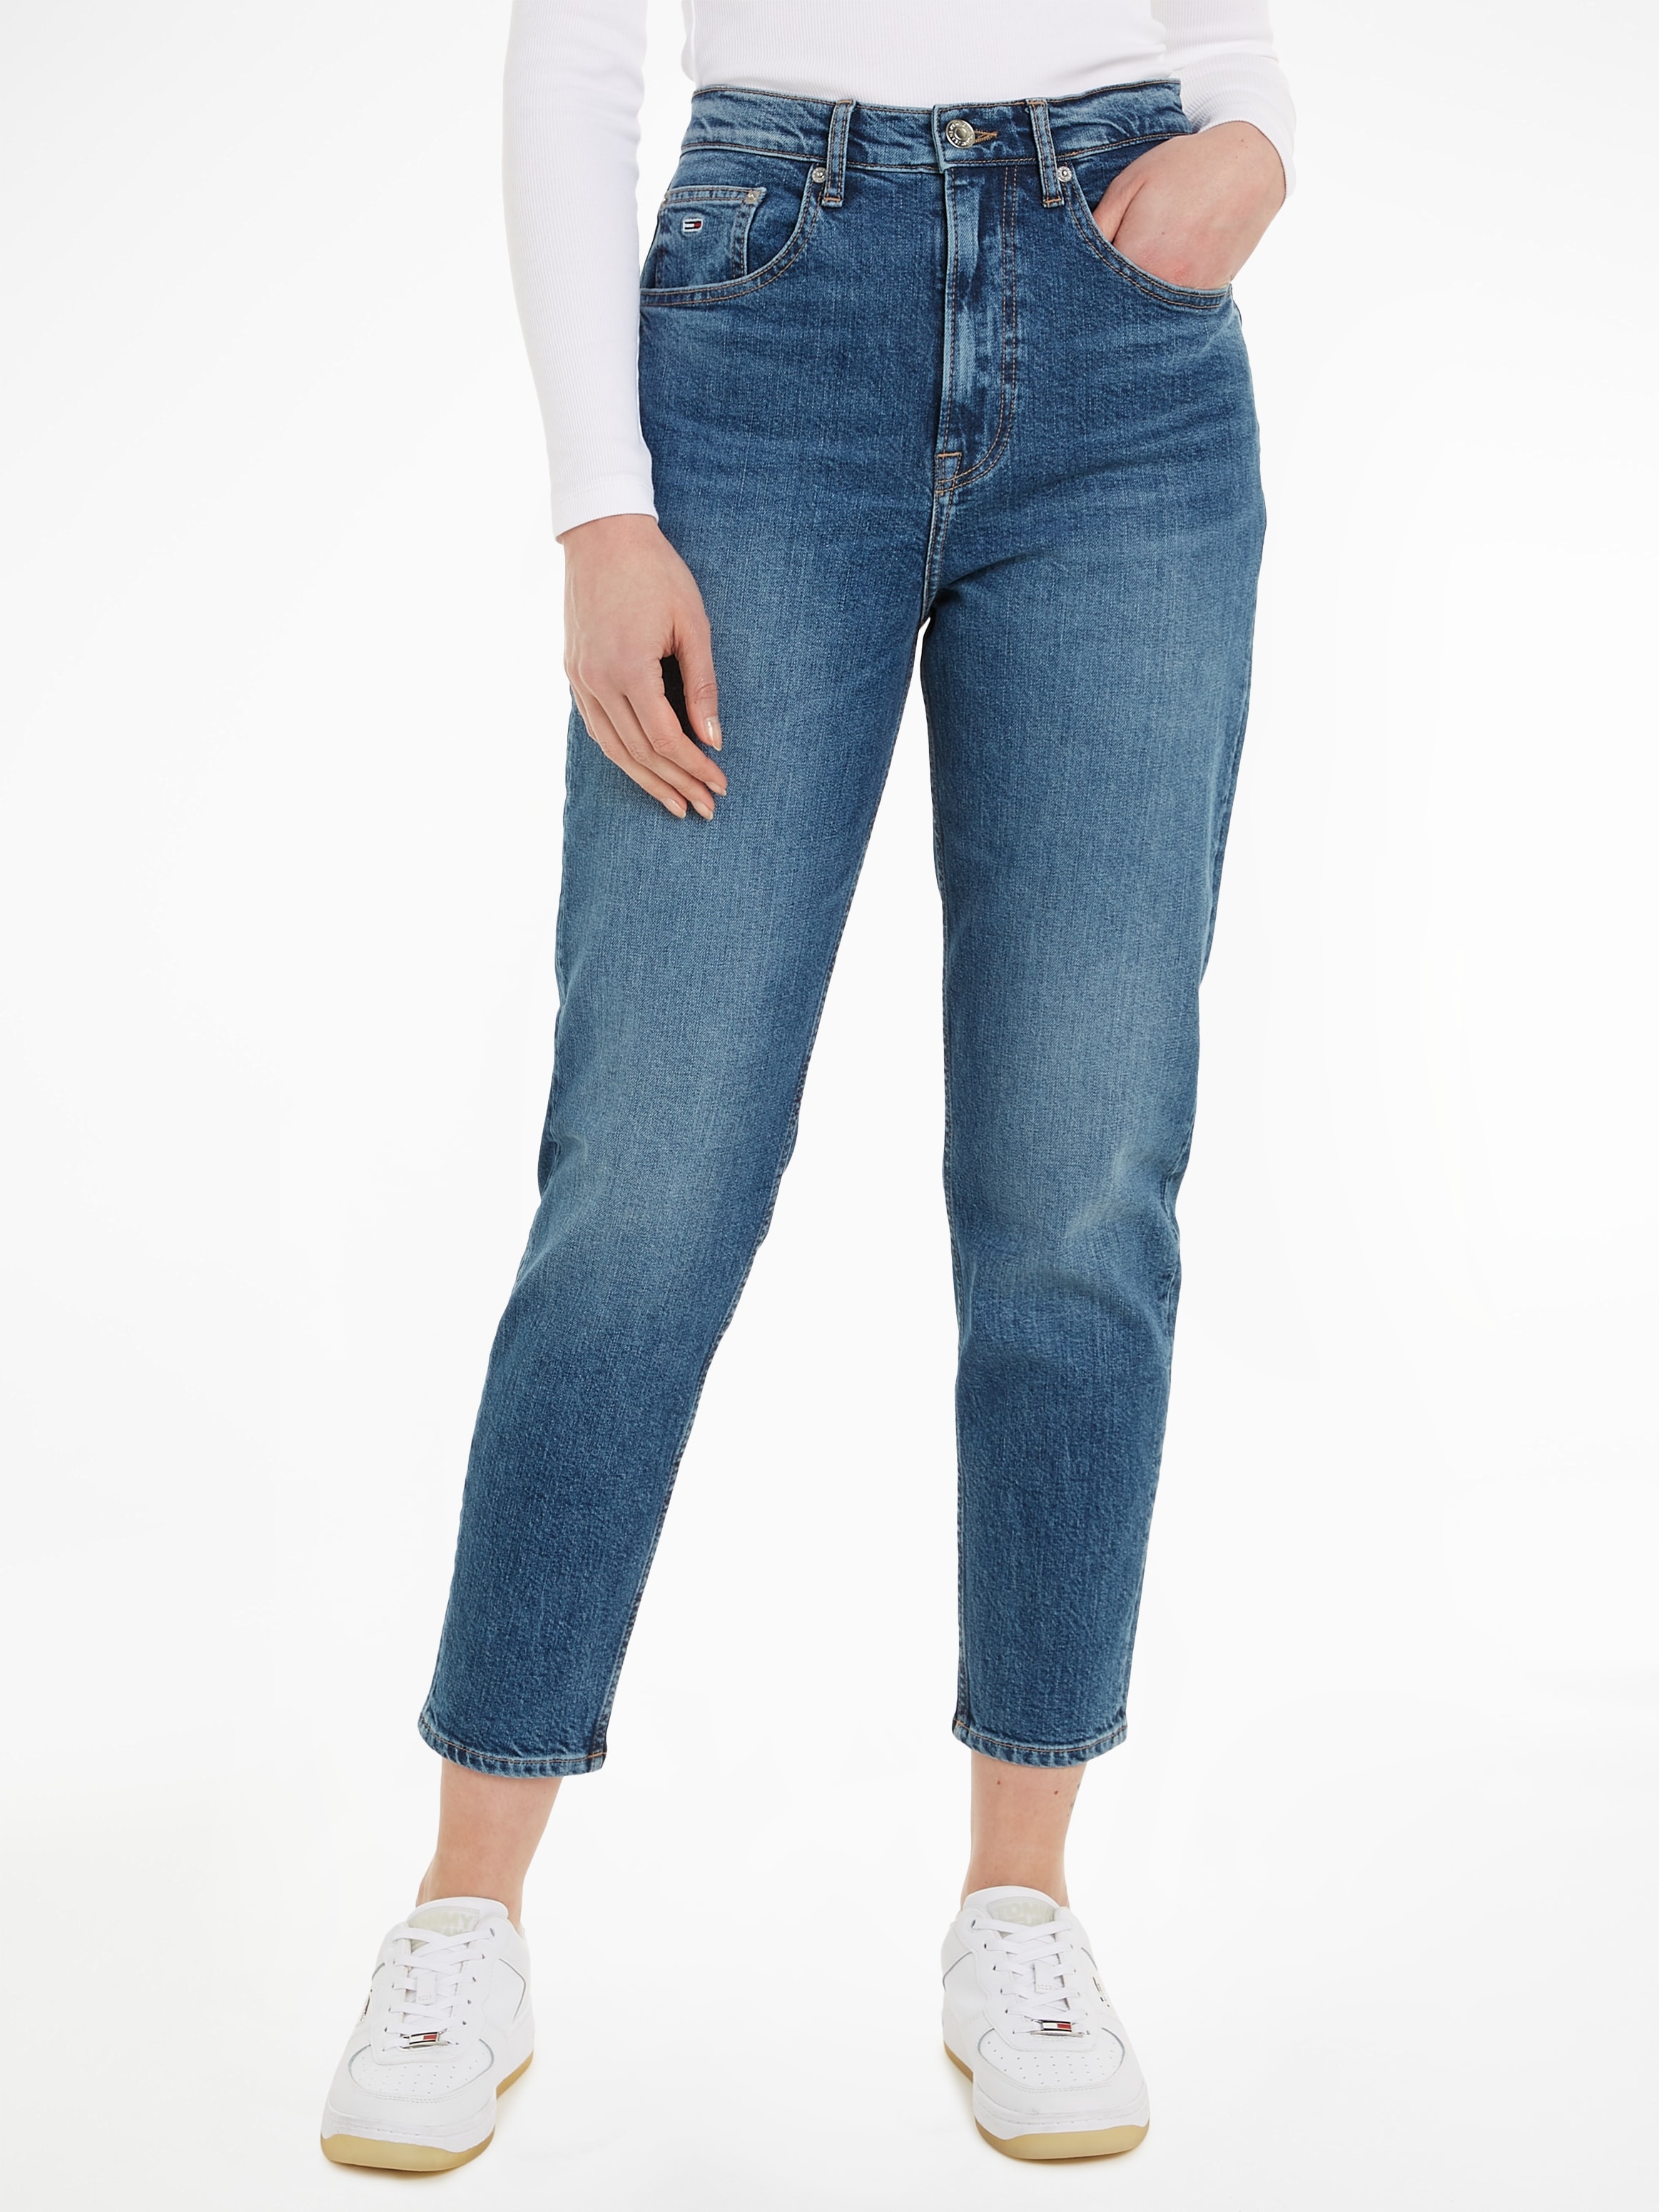 Tommy Jeans Mom-Jeans »MOM JEAN UH TPR DG«, mit Logopatch bei ♕